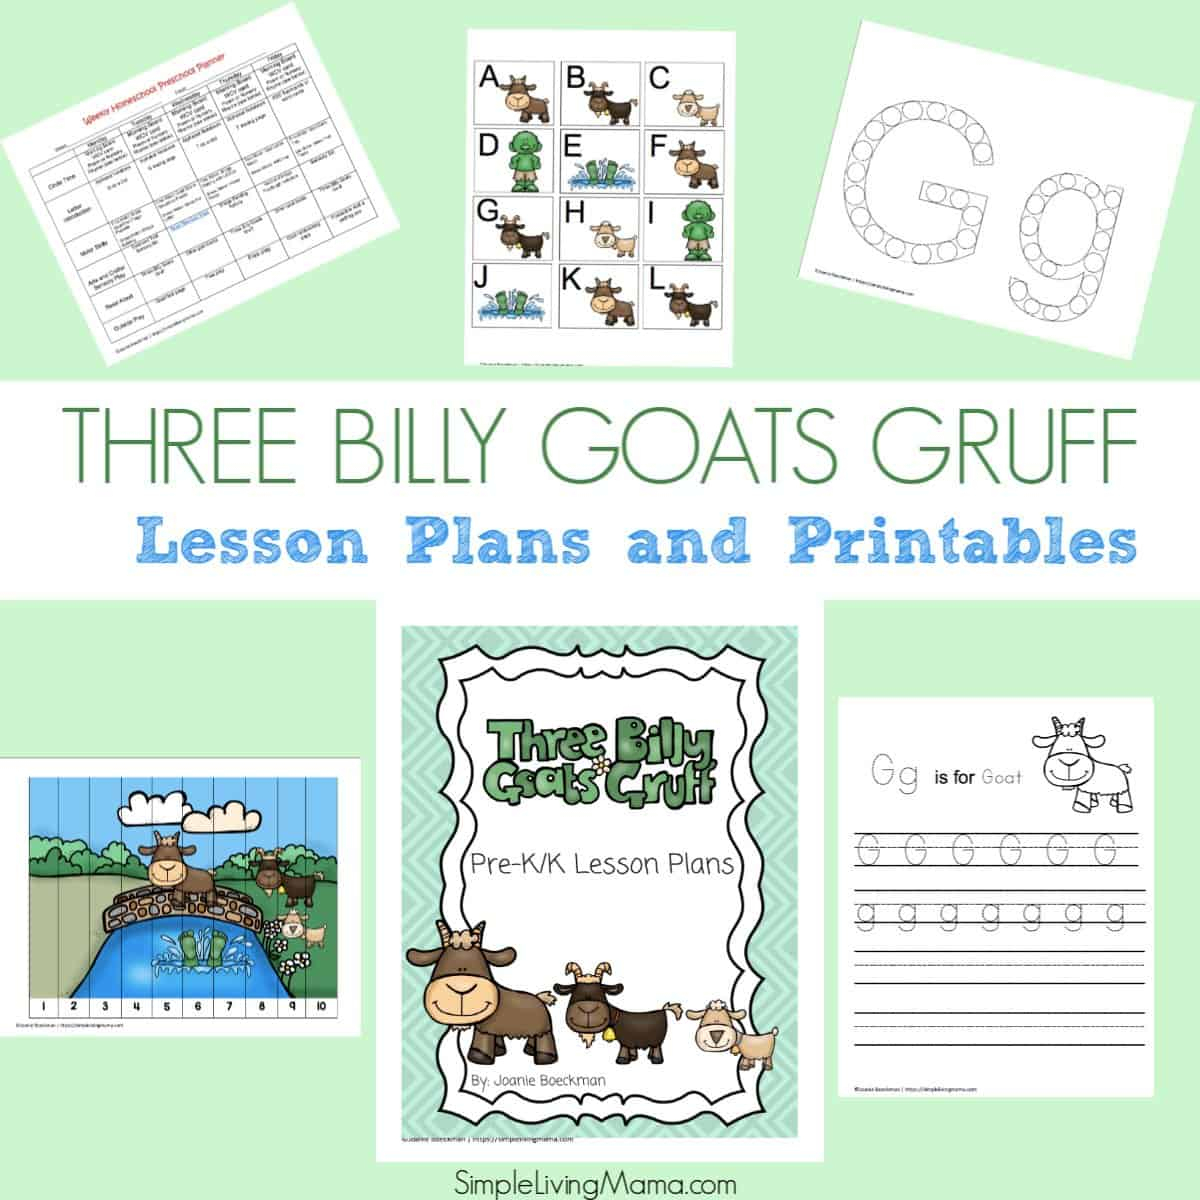 Three Billy Goats Gruff Preschool And Kindergarten Lesson Plans And  Printables